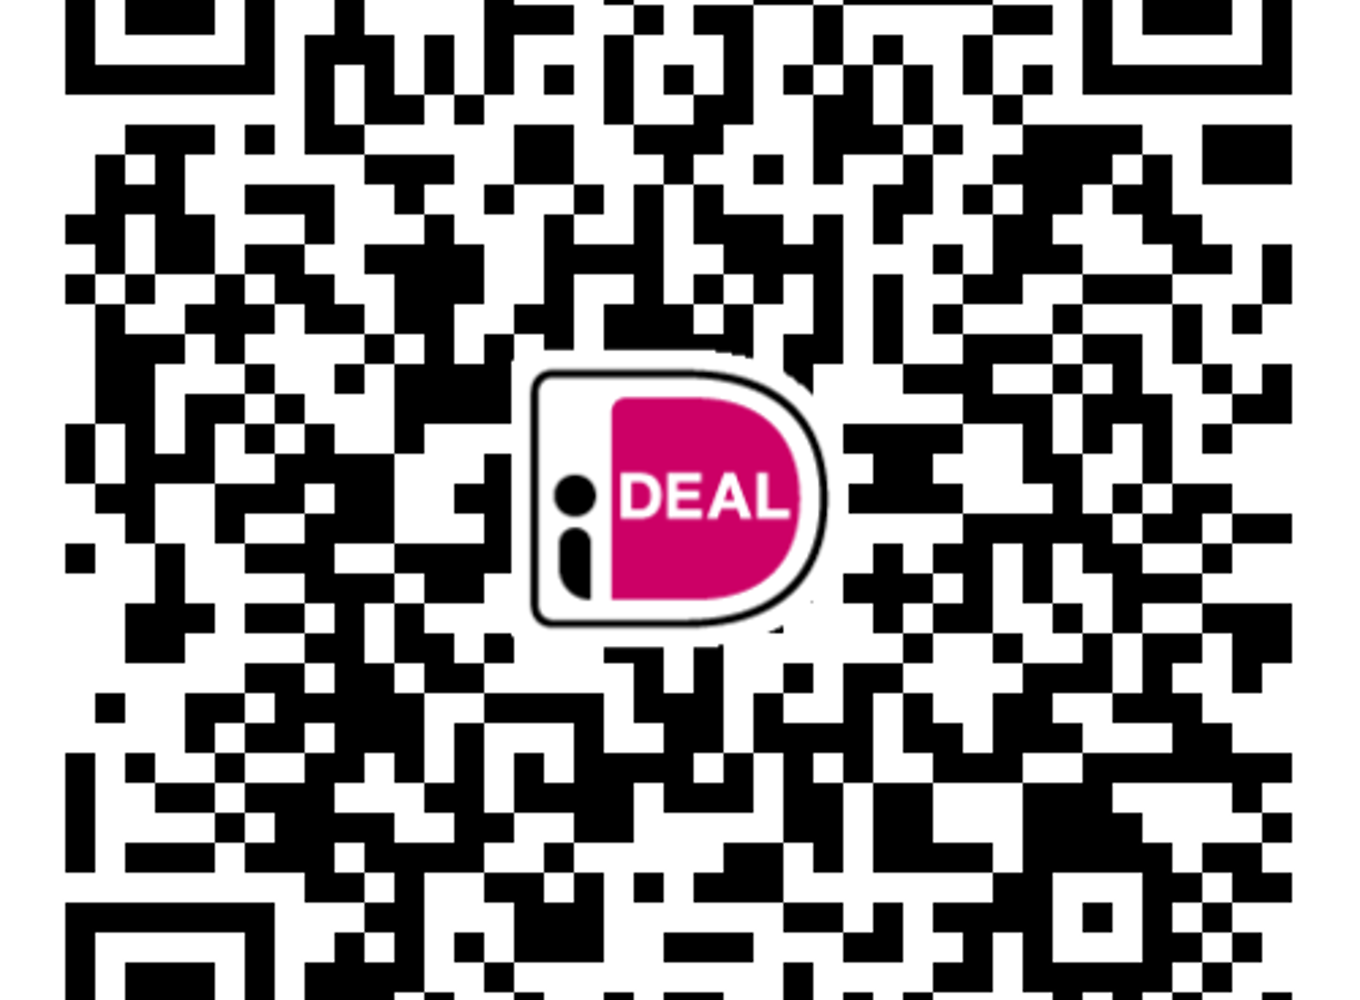 iDEAL QR code  - try it out